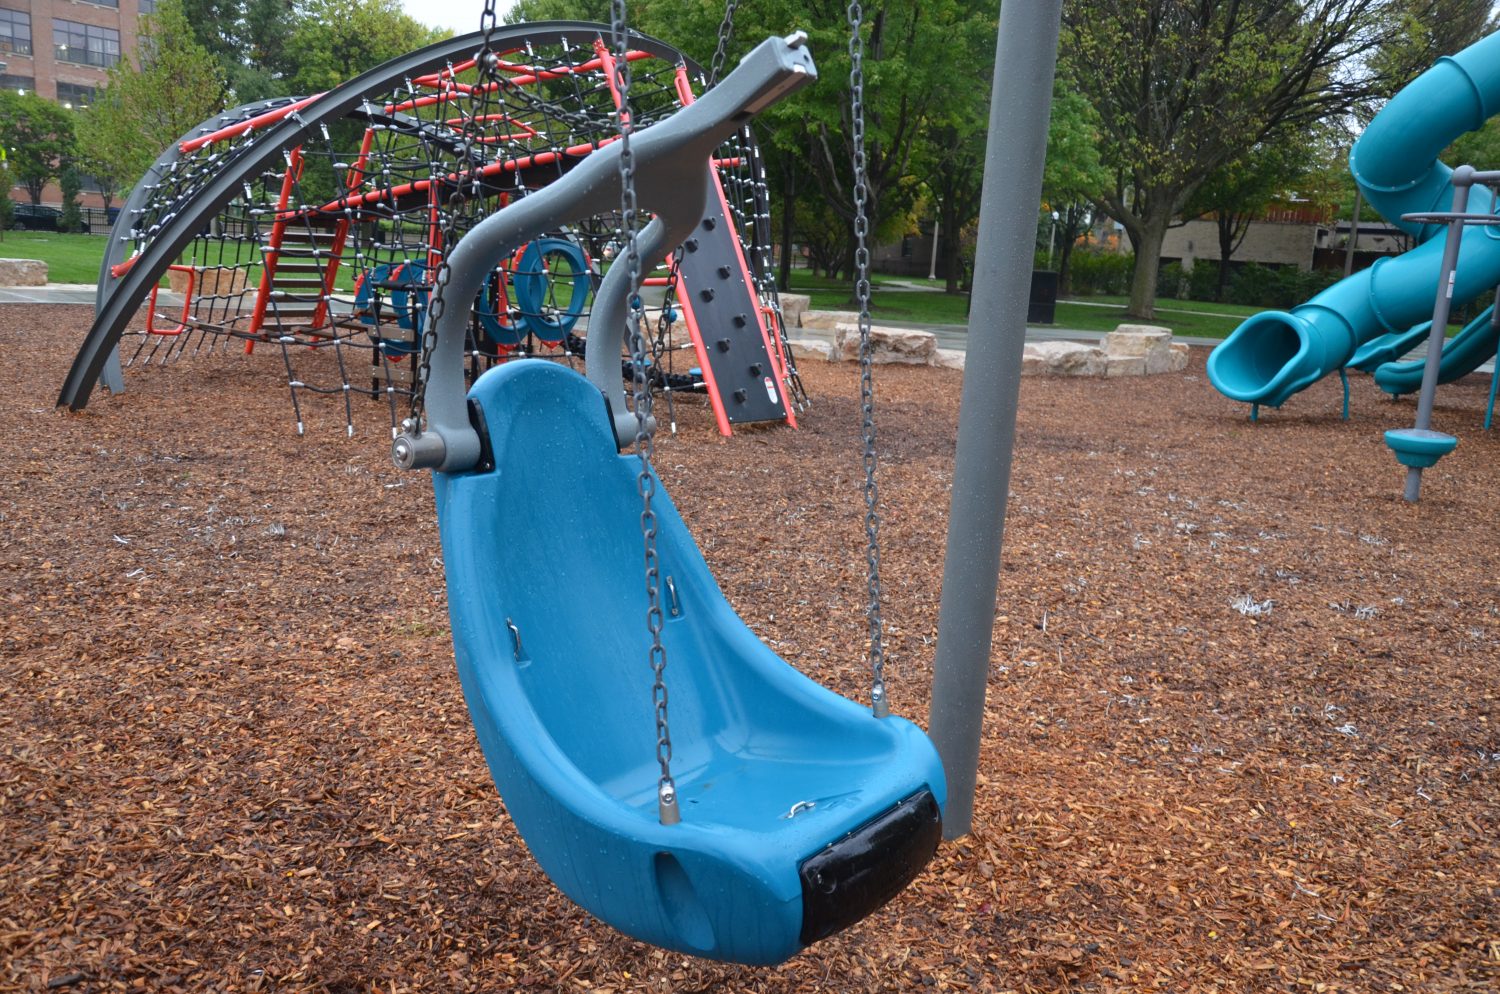 Here's What The New Walsh Park Playground On The 606 In Bucktown Looks ...